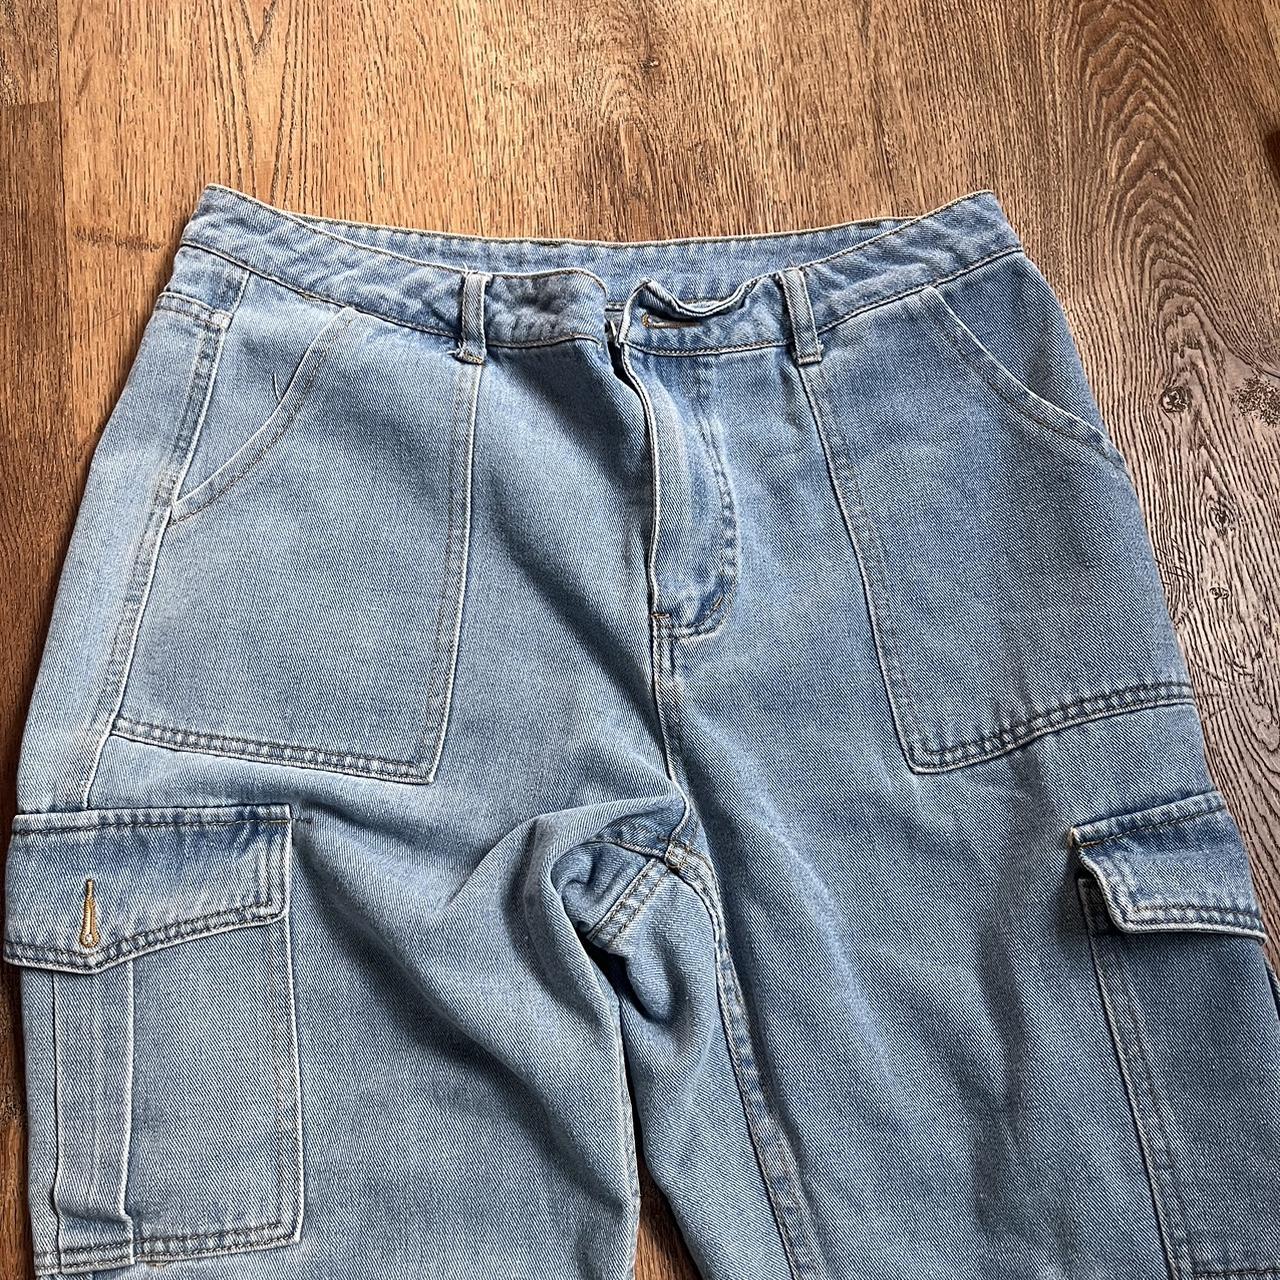 Men's Blue and White Jeans | Depop